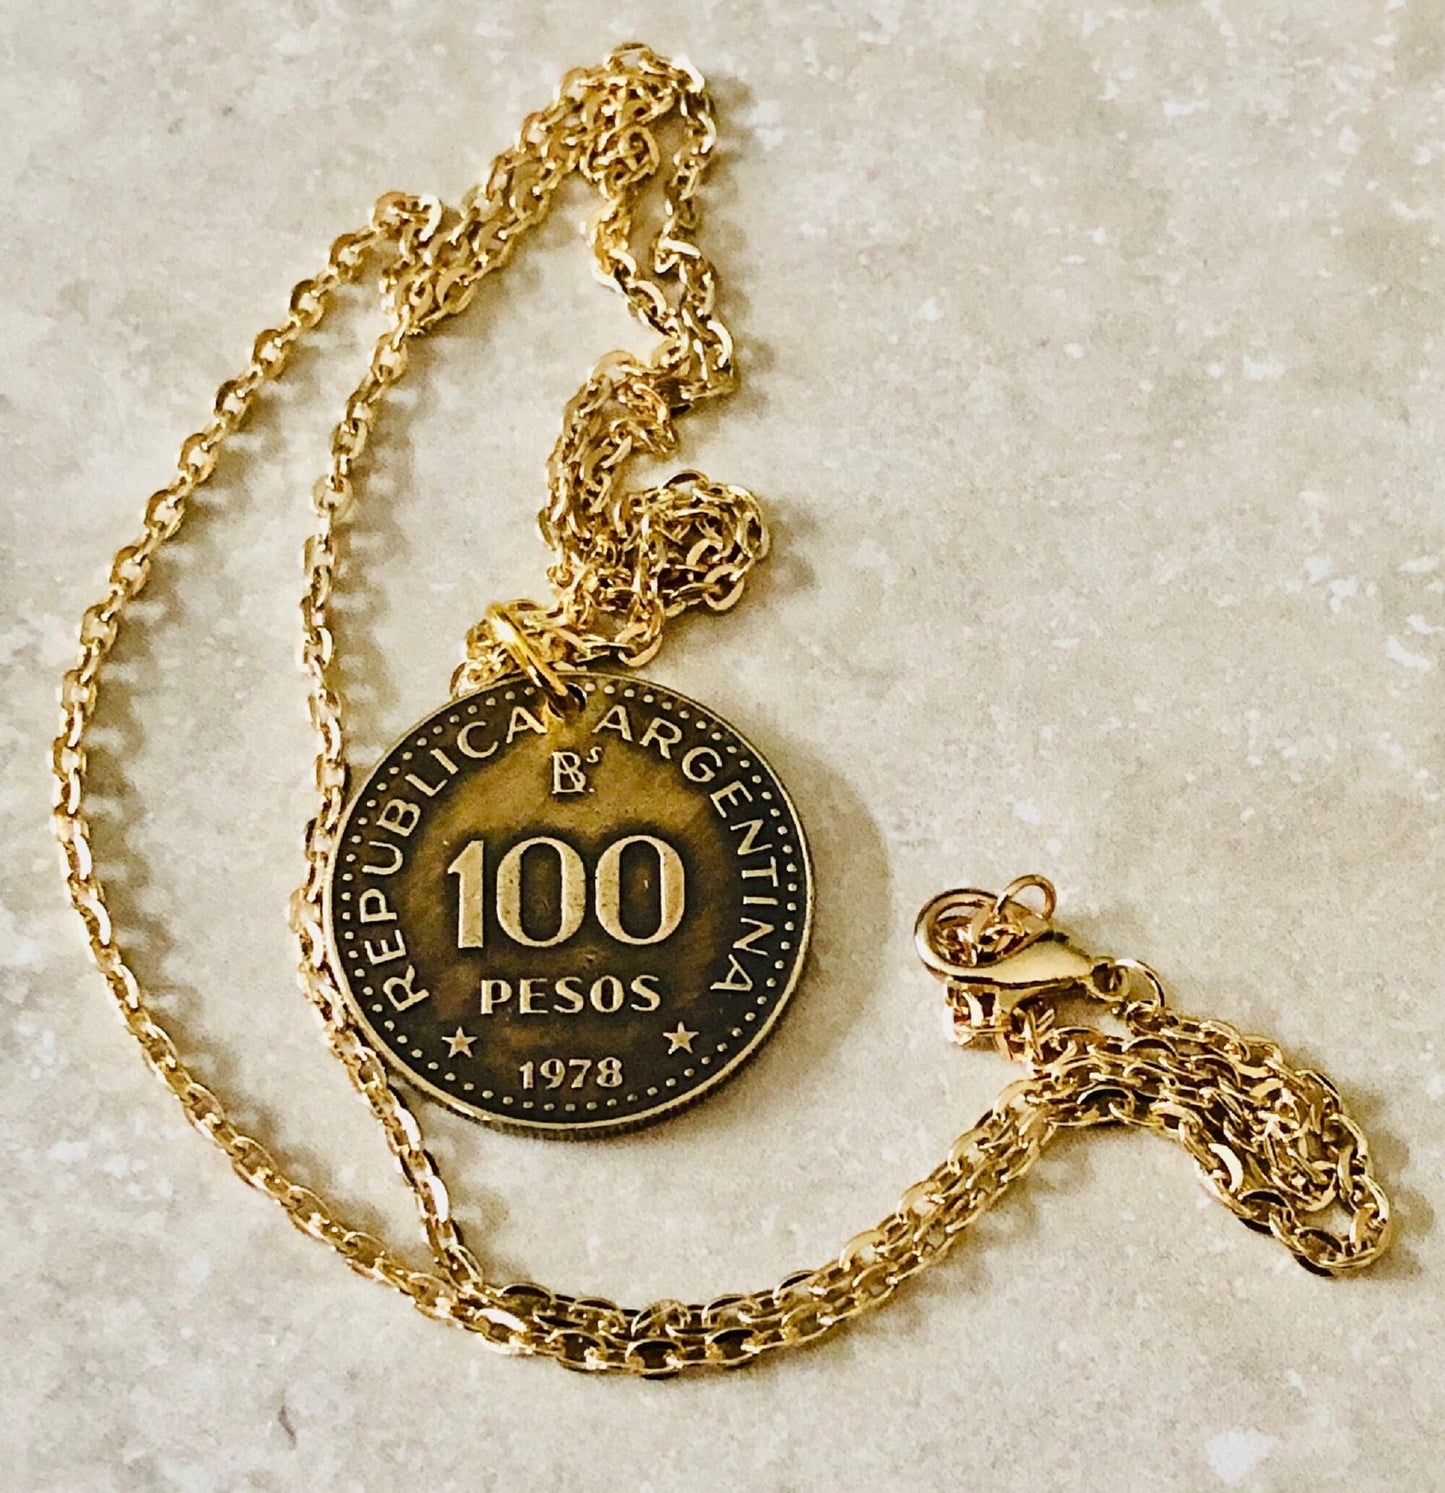 Argentina Coin Necklace 1978 Argentinian 100 Pesos Del Rio Personal Handmade Jewelry Gift Friend Charm For Him Her World Coin Collector